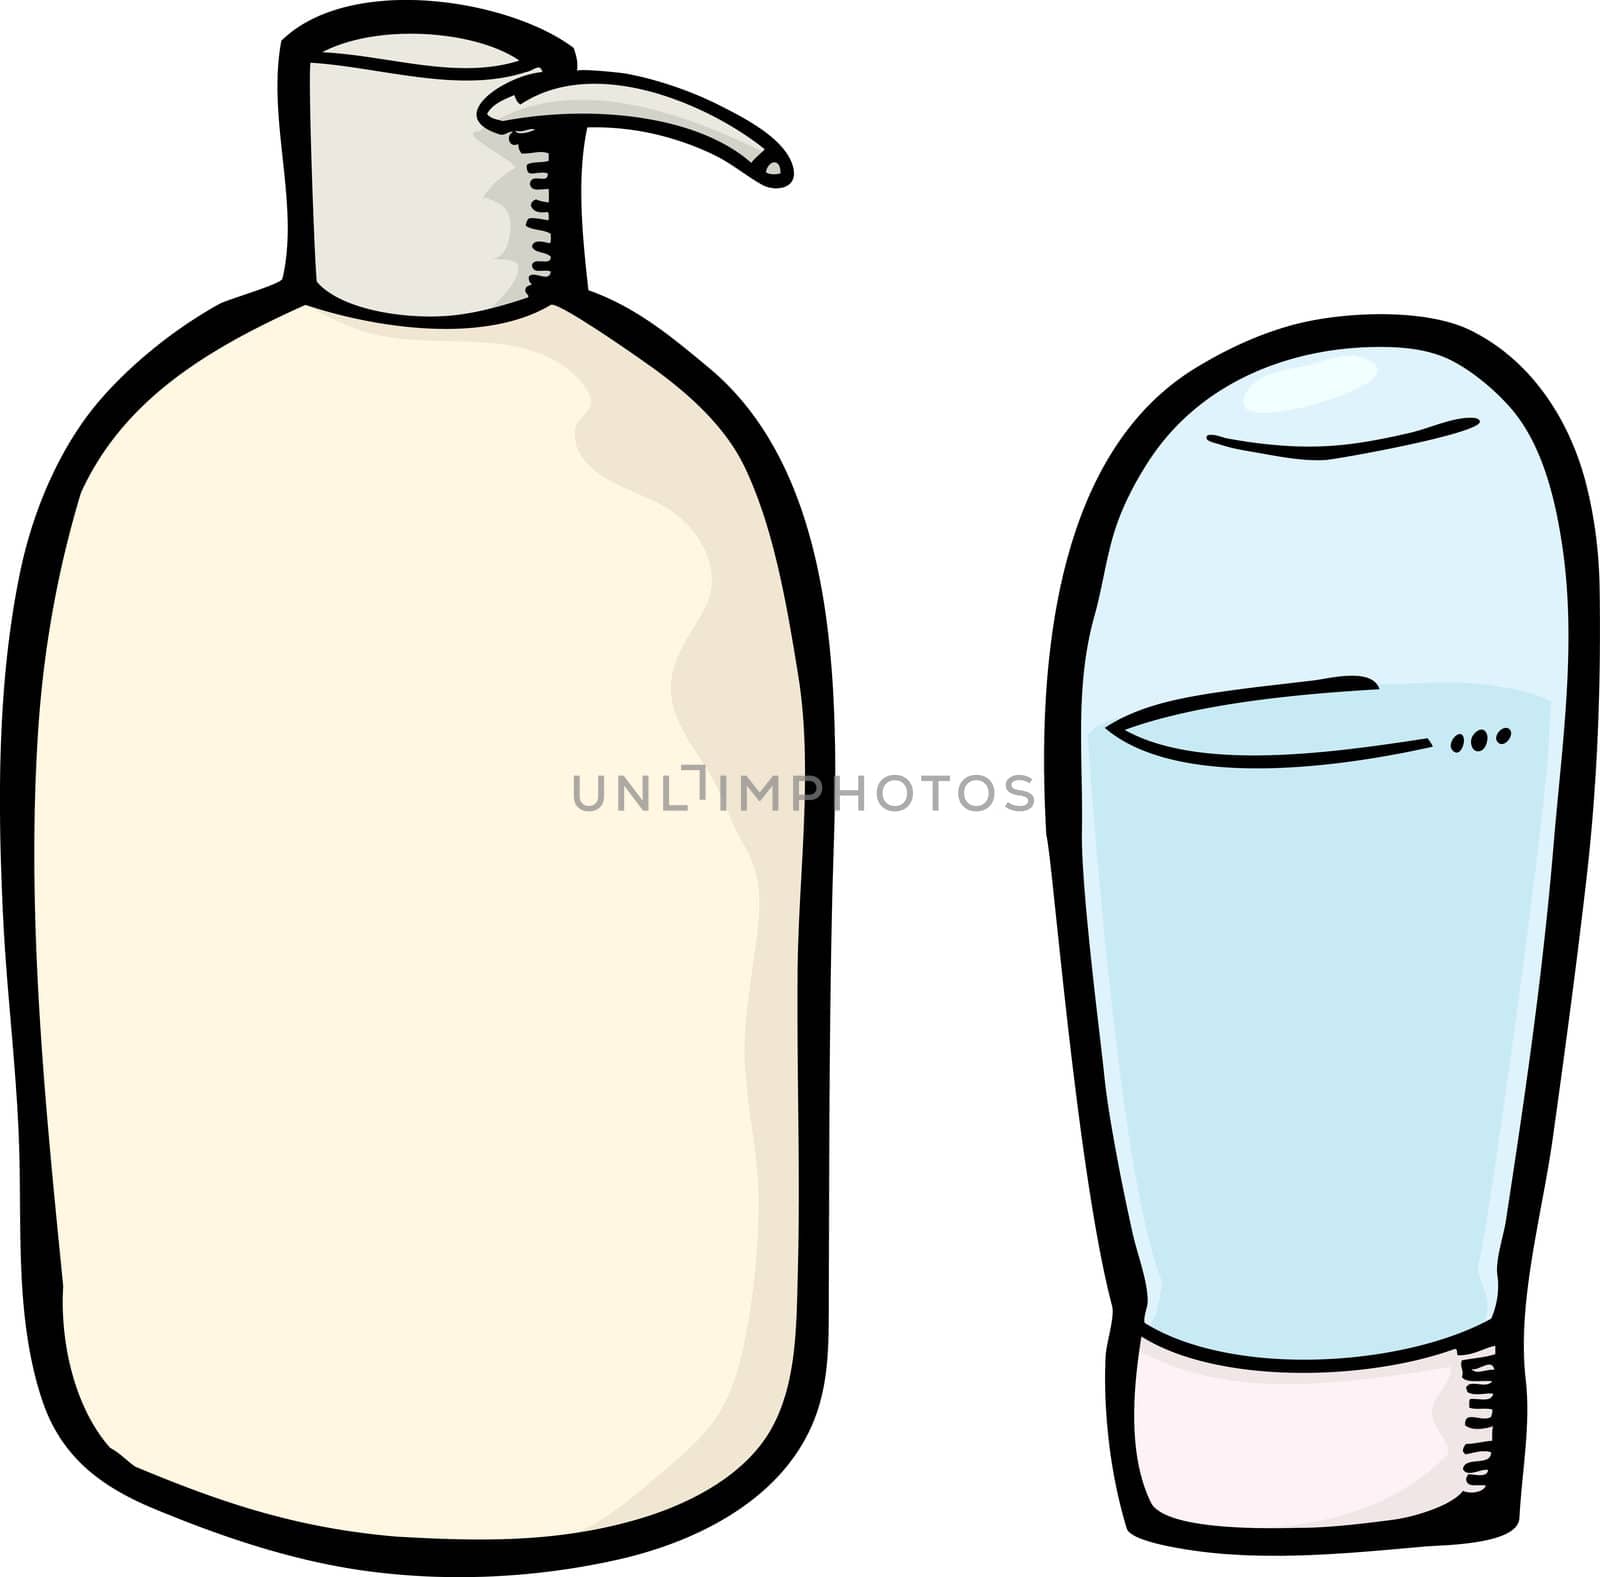 Soap pump and shampoo bottles isolated over white